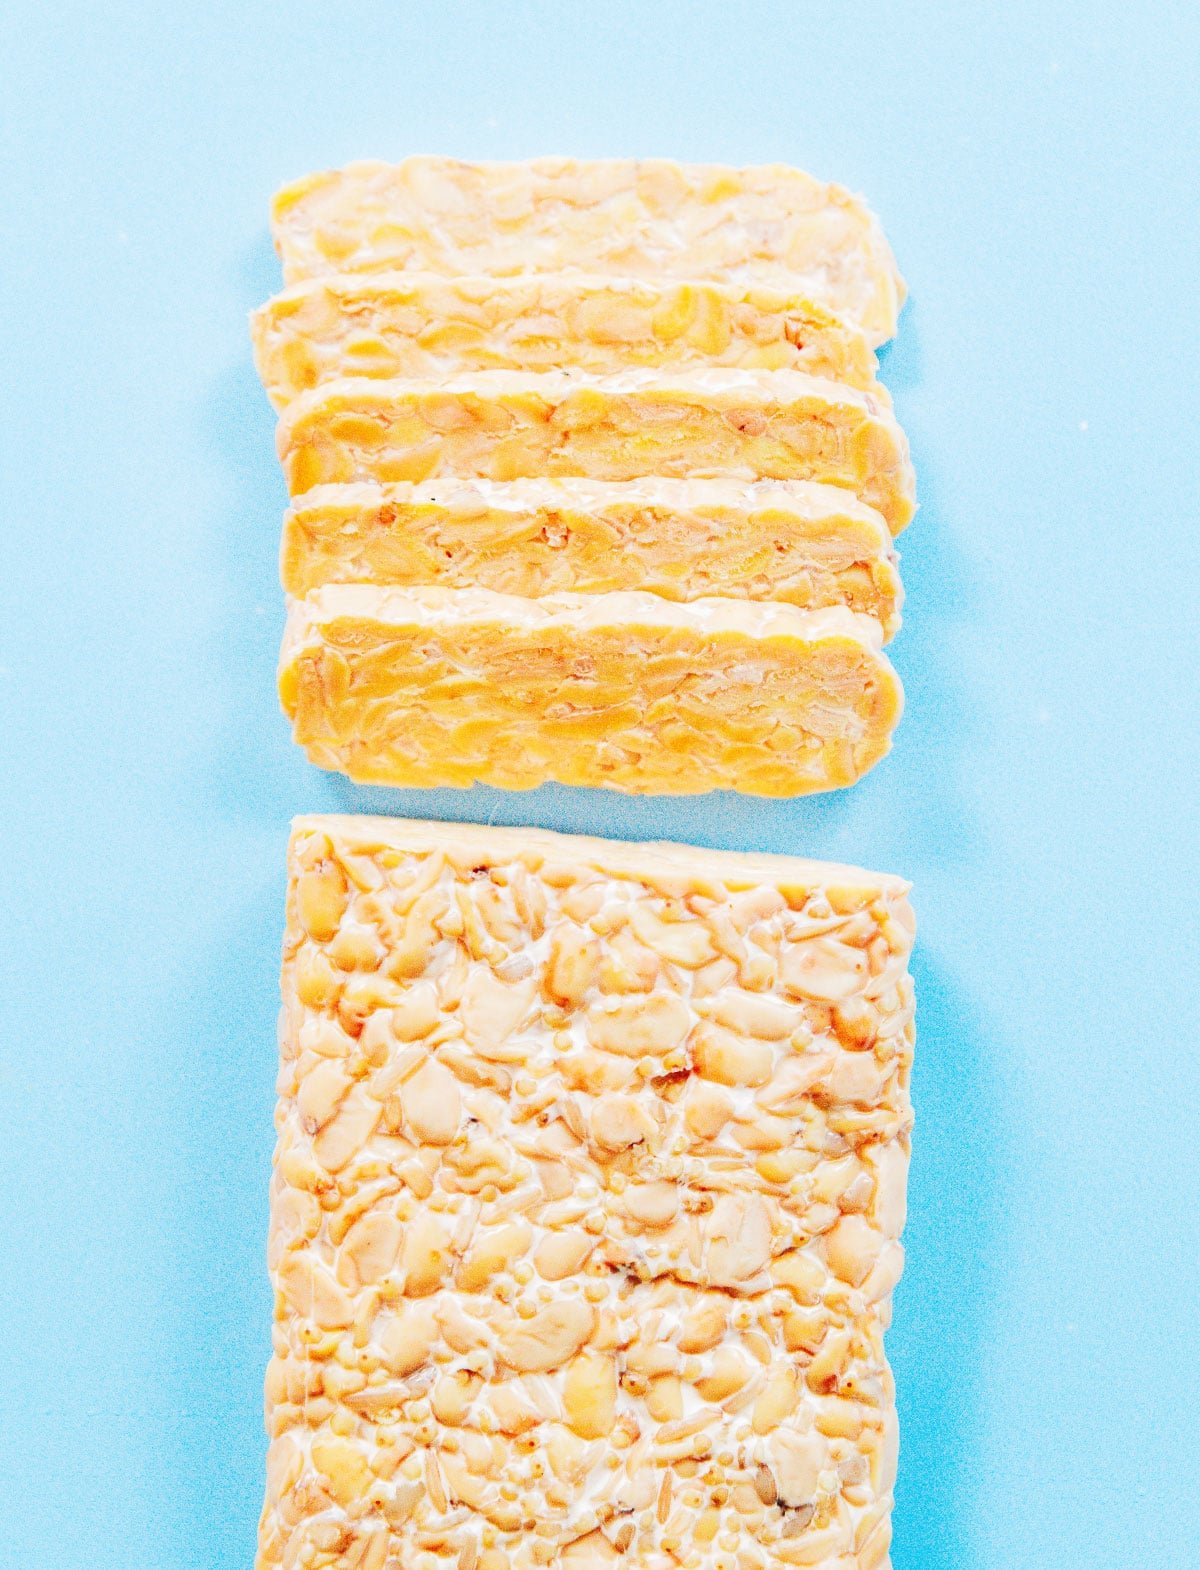 A slab of tempeh with narrow slices cut off one end.